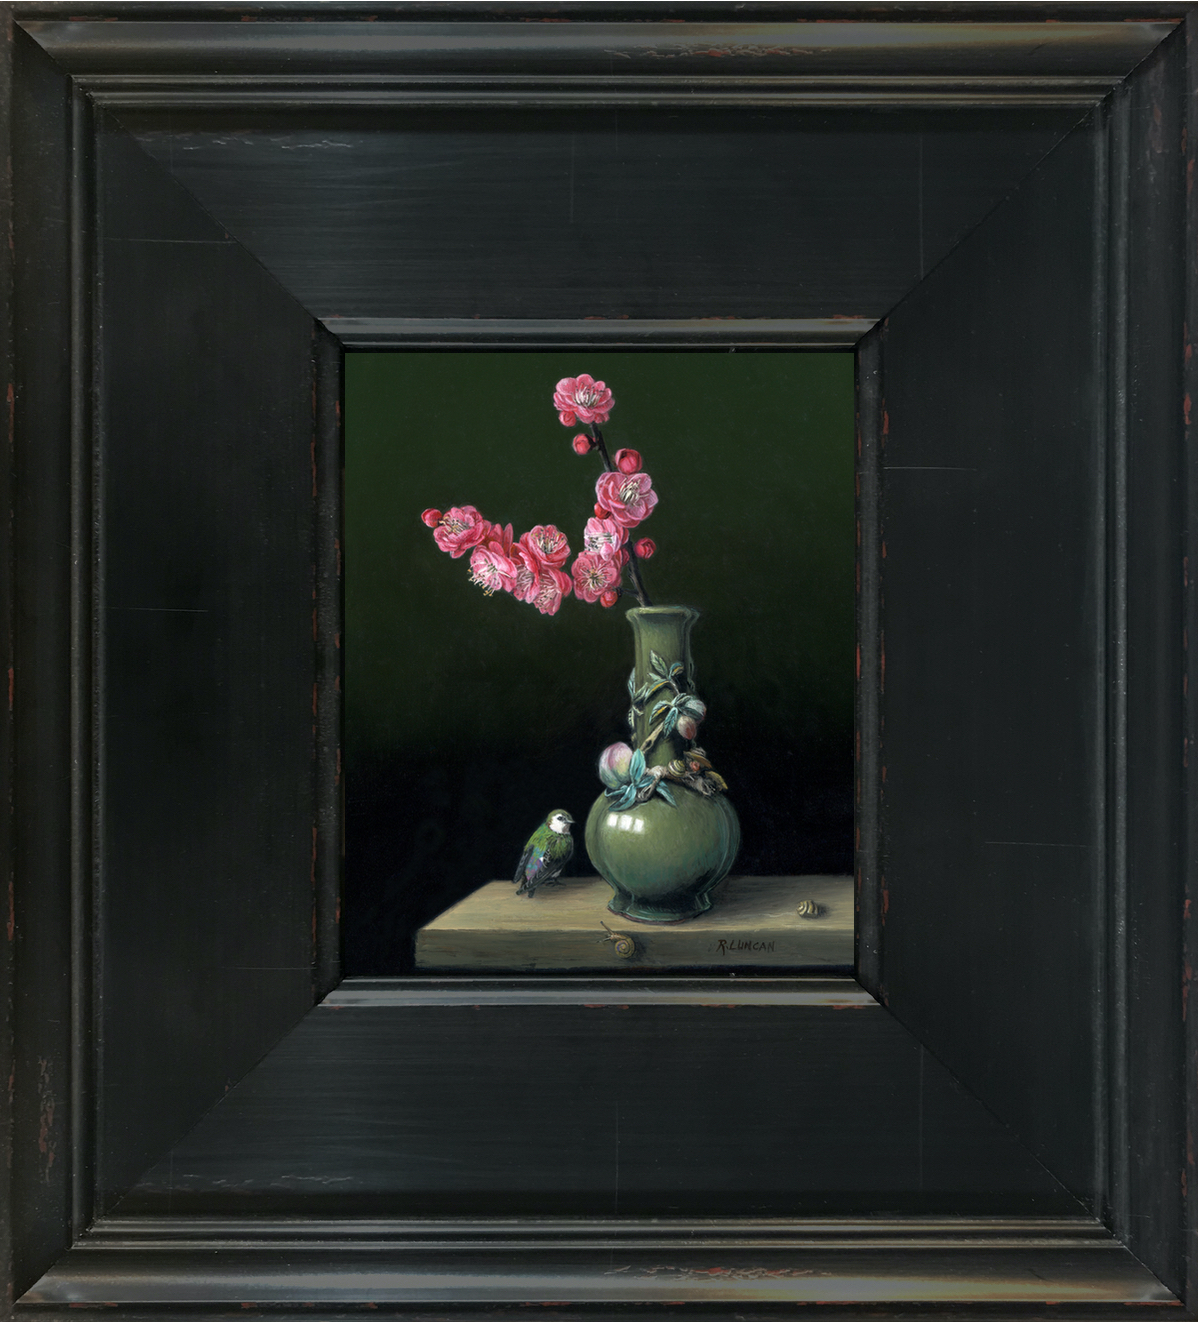 Still life painting of peach blossoms and vase from the Seattle Art Museum collection by Rebecca Luncan